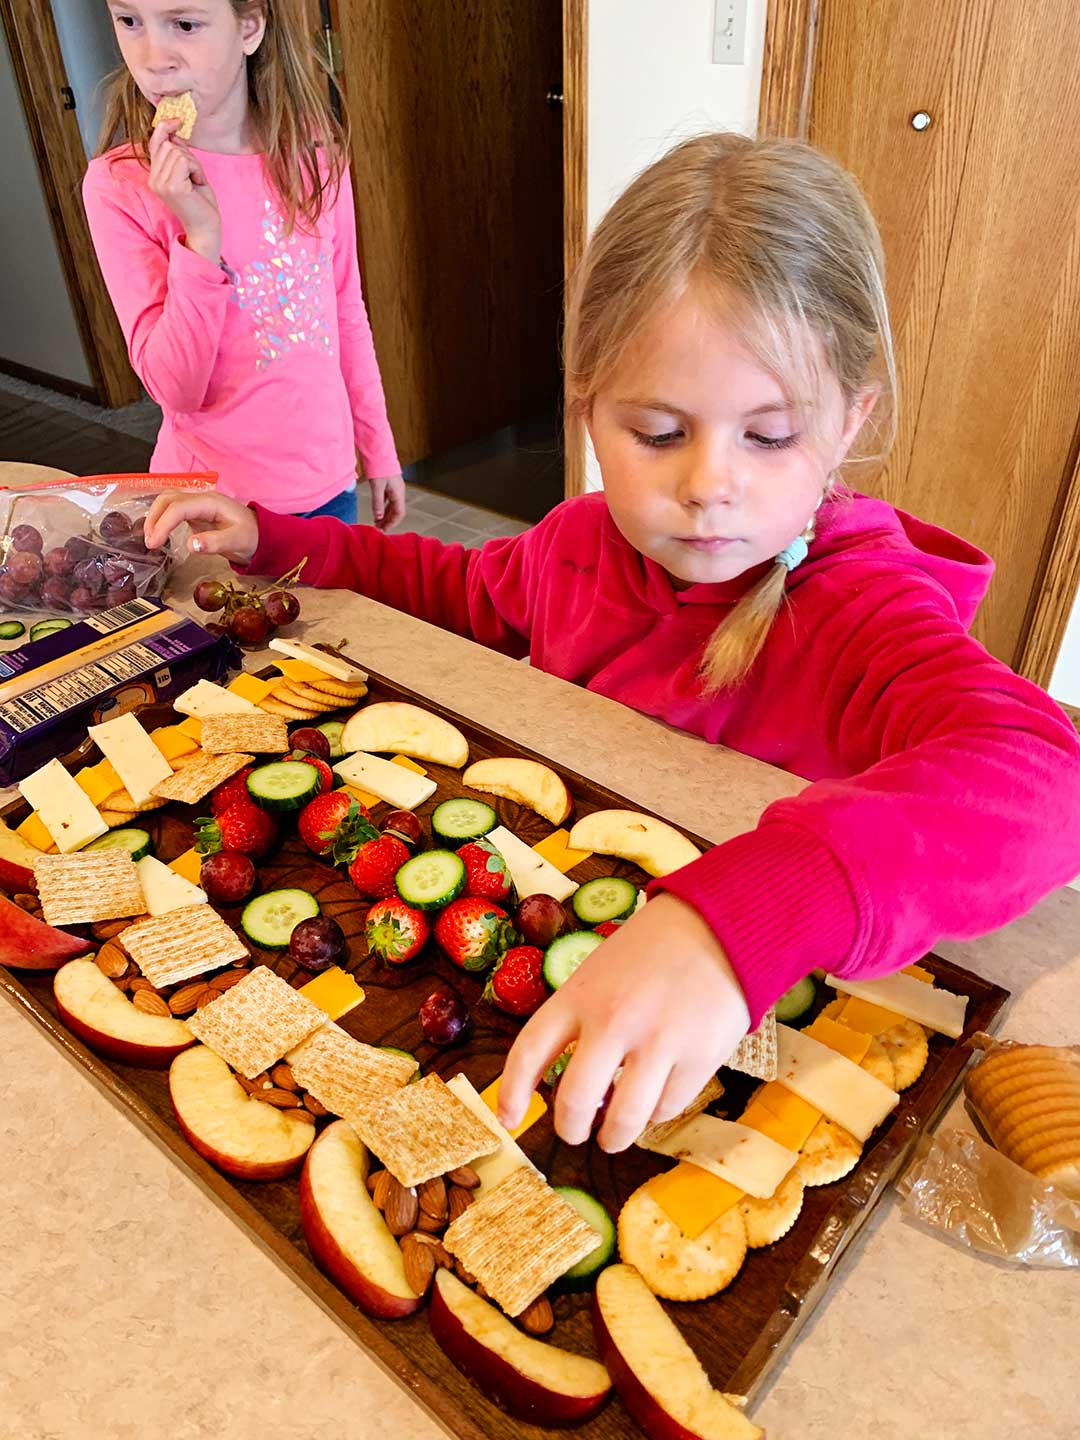 Young girl in pink sweatshirt arranging food on charcuterie board.